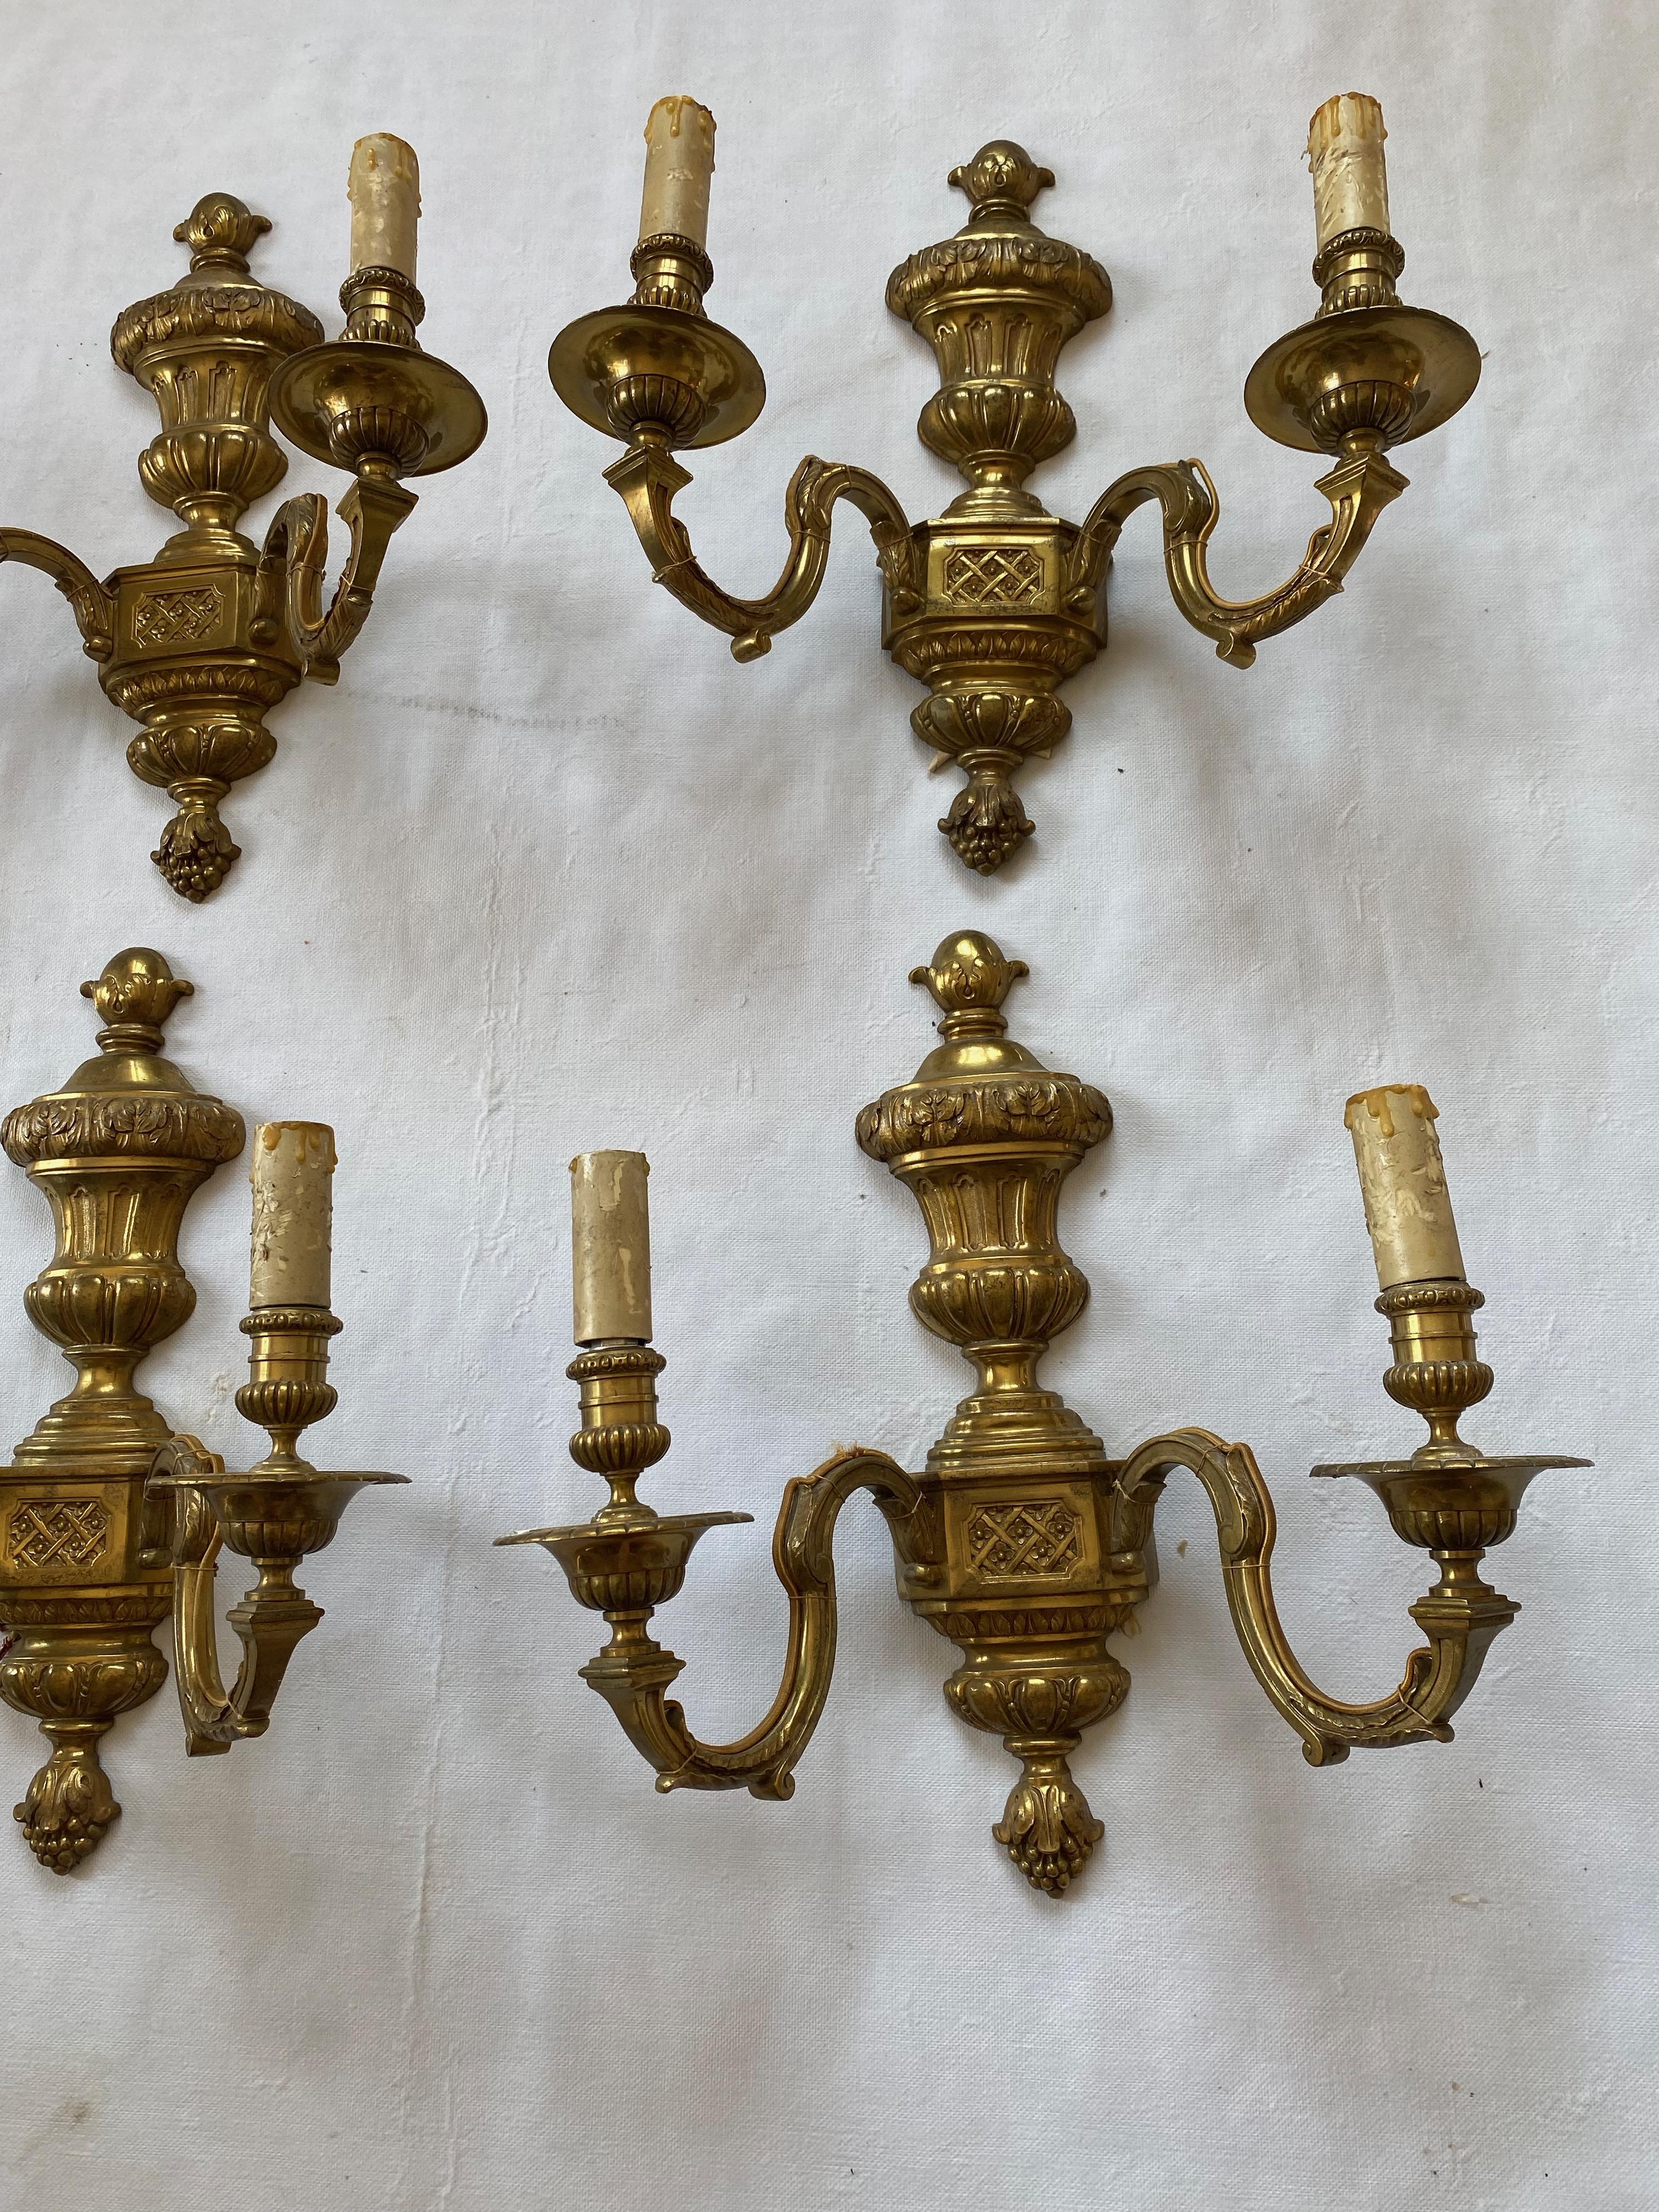 Series of 6 wall lights in gilded bronze, Louis 16 style, 2 E 14 screw bulbs per wall light, Maison Baguès label on the back
Height:39cm
Width: 36cm
Depth: 18cm